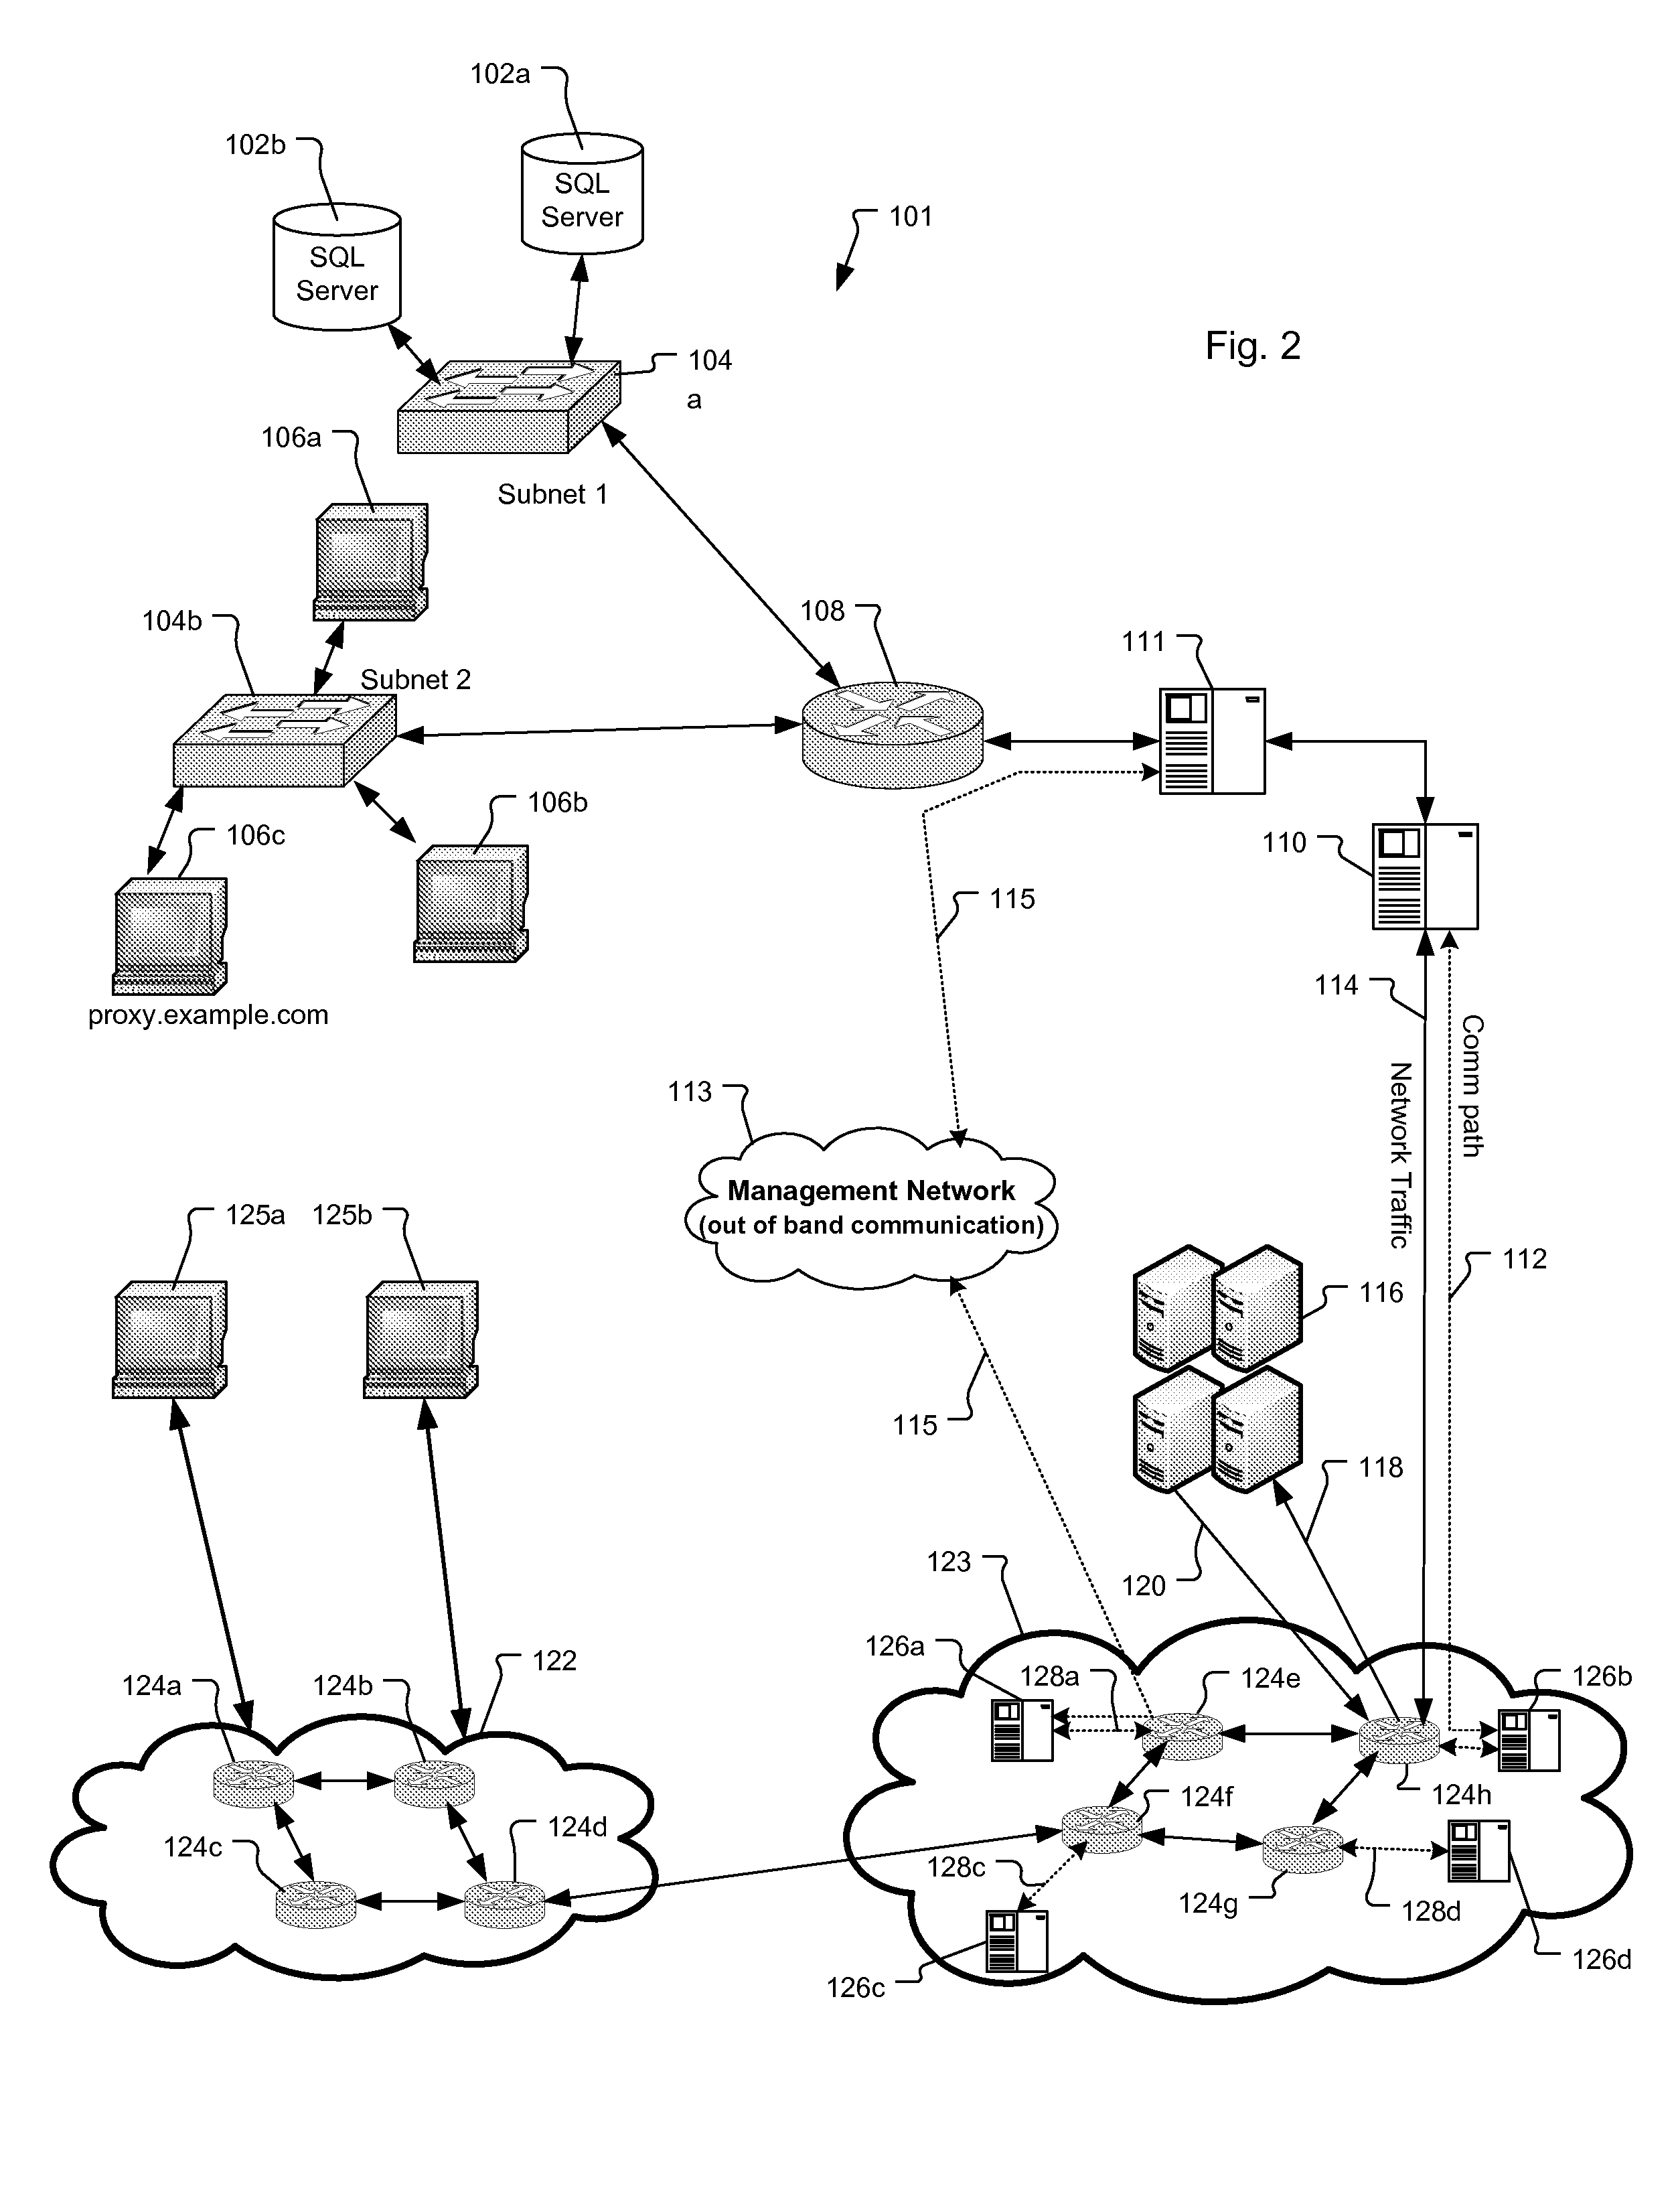 System and Method for Denial of Service Attack Mitigation Using Cloud Services